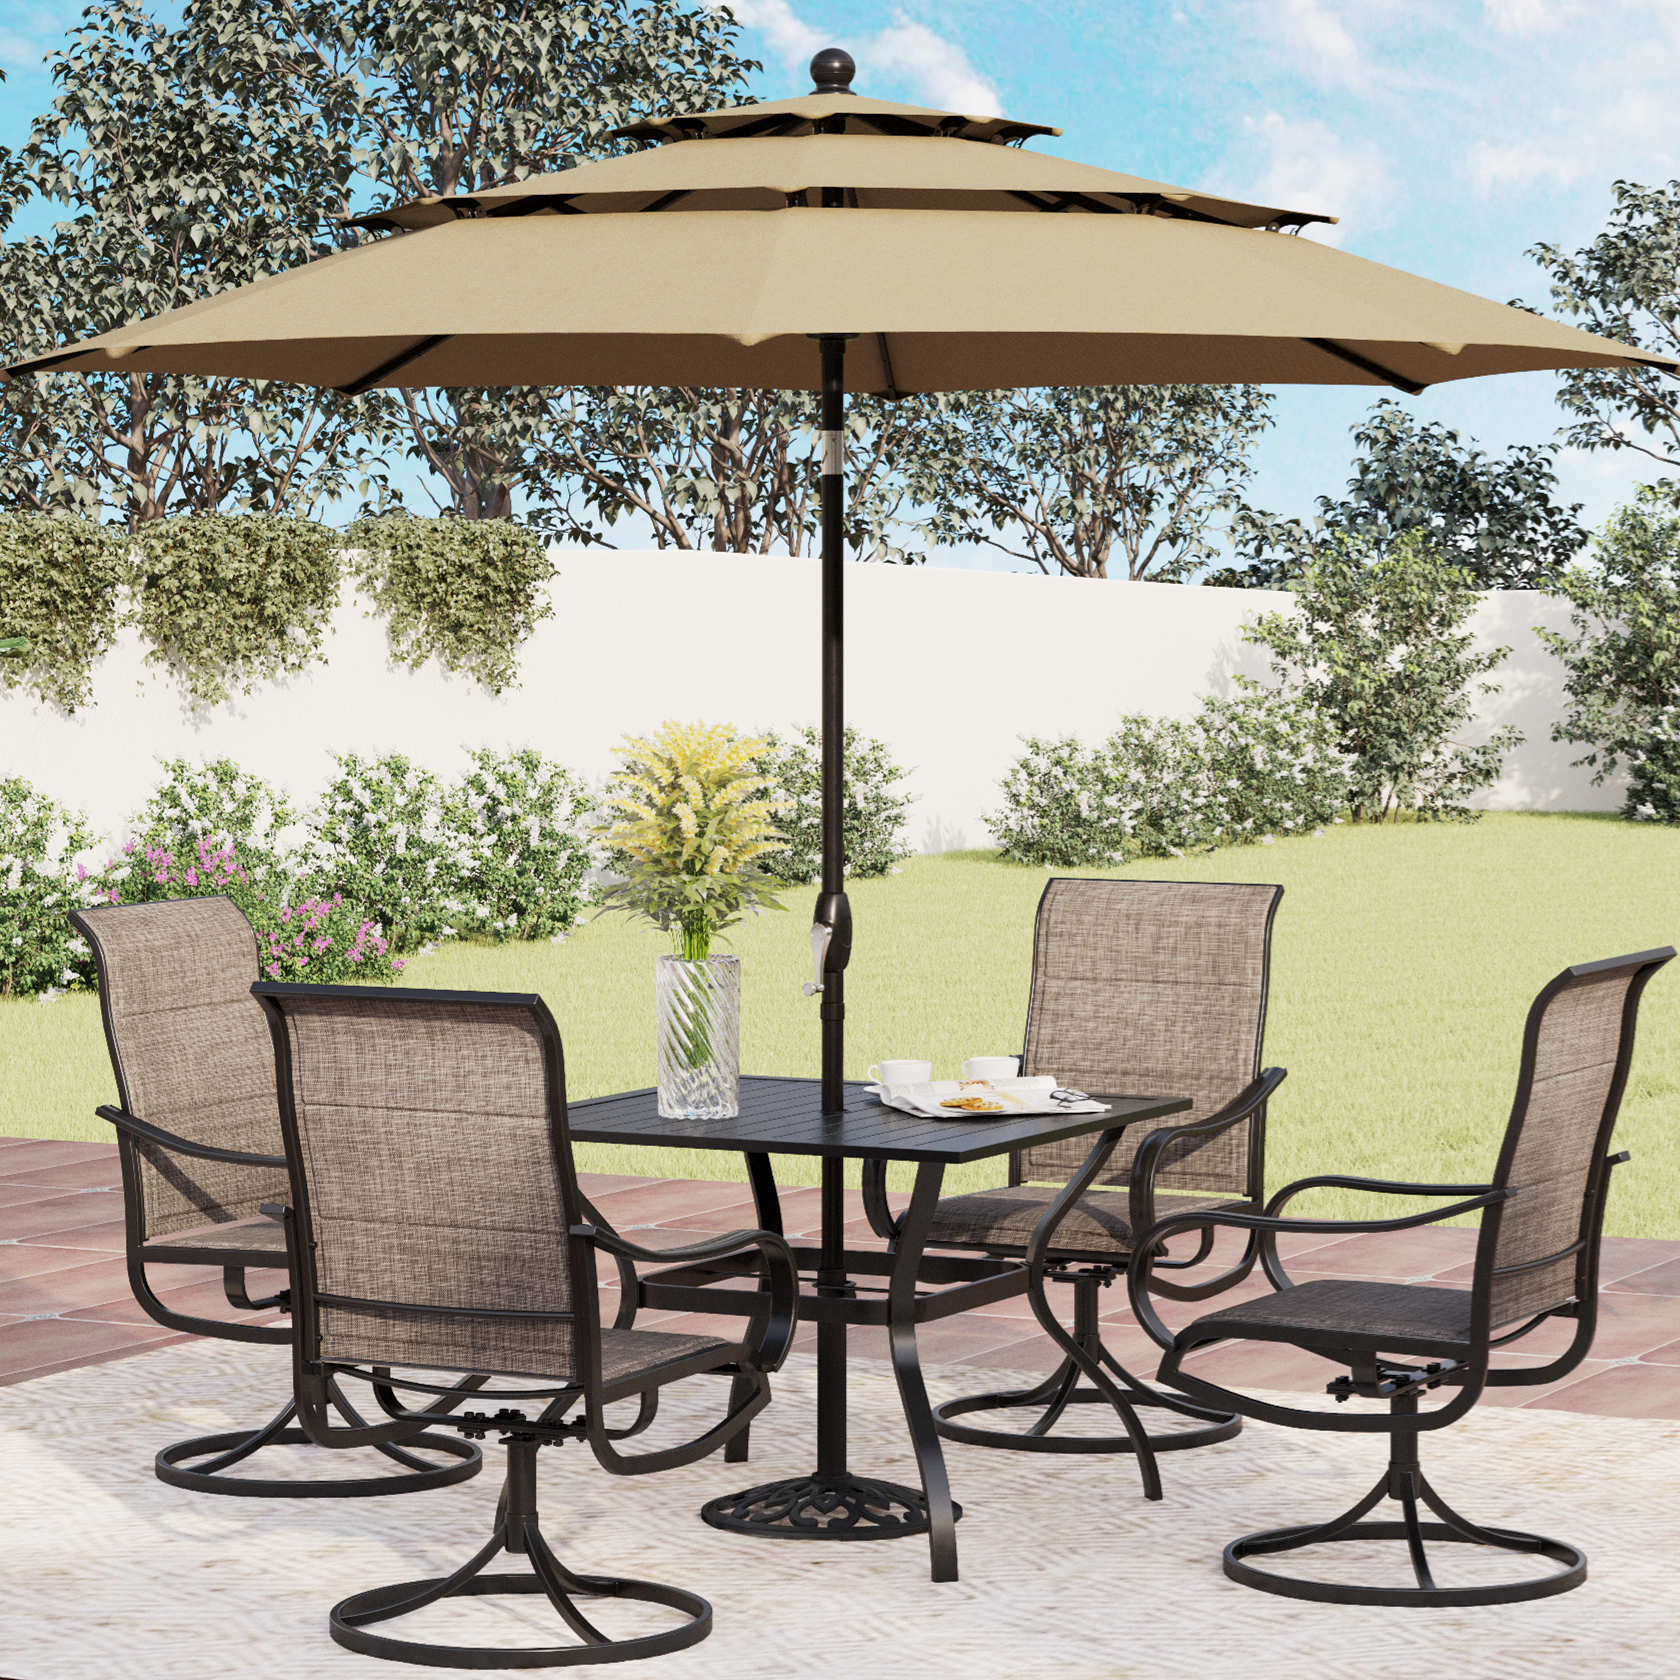 PHI VILLA 6-Piece Patio Dining Set with an Umbrella Steel Square Table & Textilene Swivel Chairs